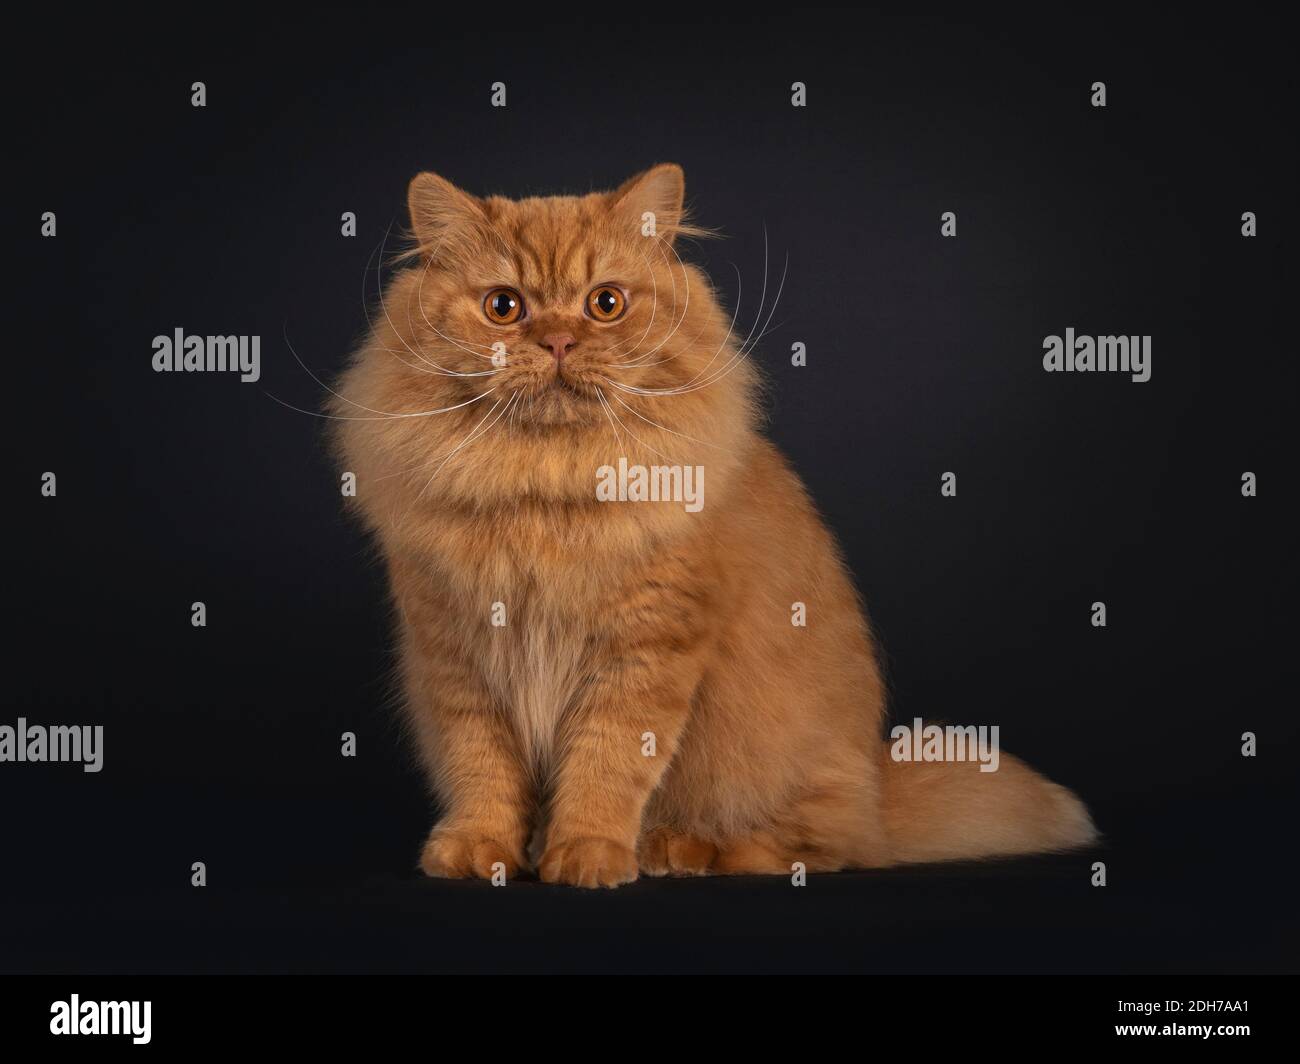 Impressive red British Longhair cat, sitting up facing front. Looking towards camera. Isolated on black bakground. Stock Photo